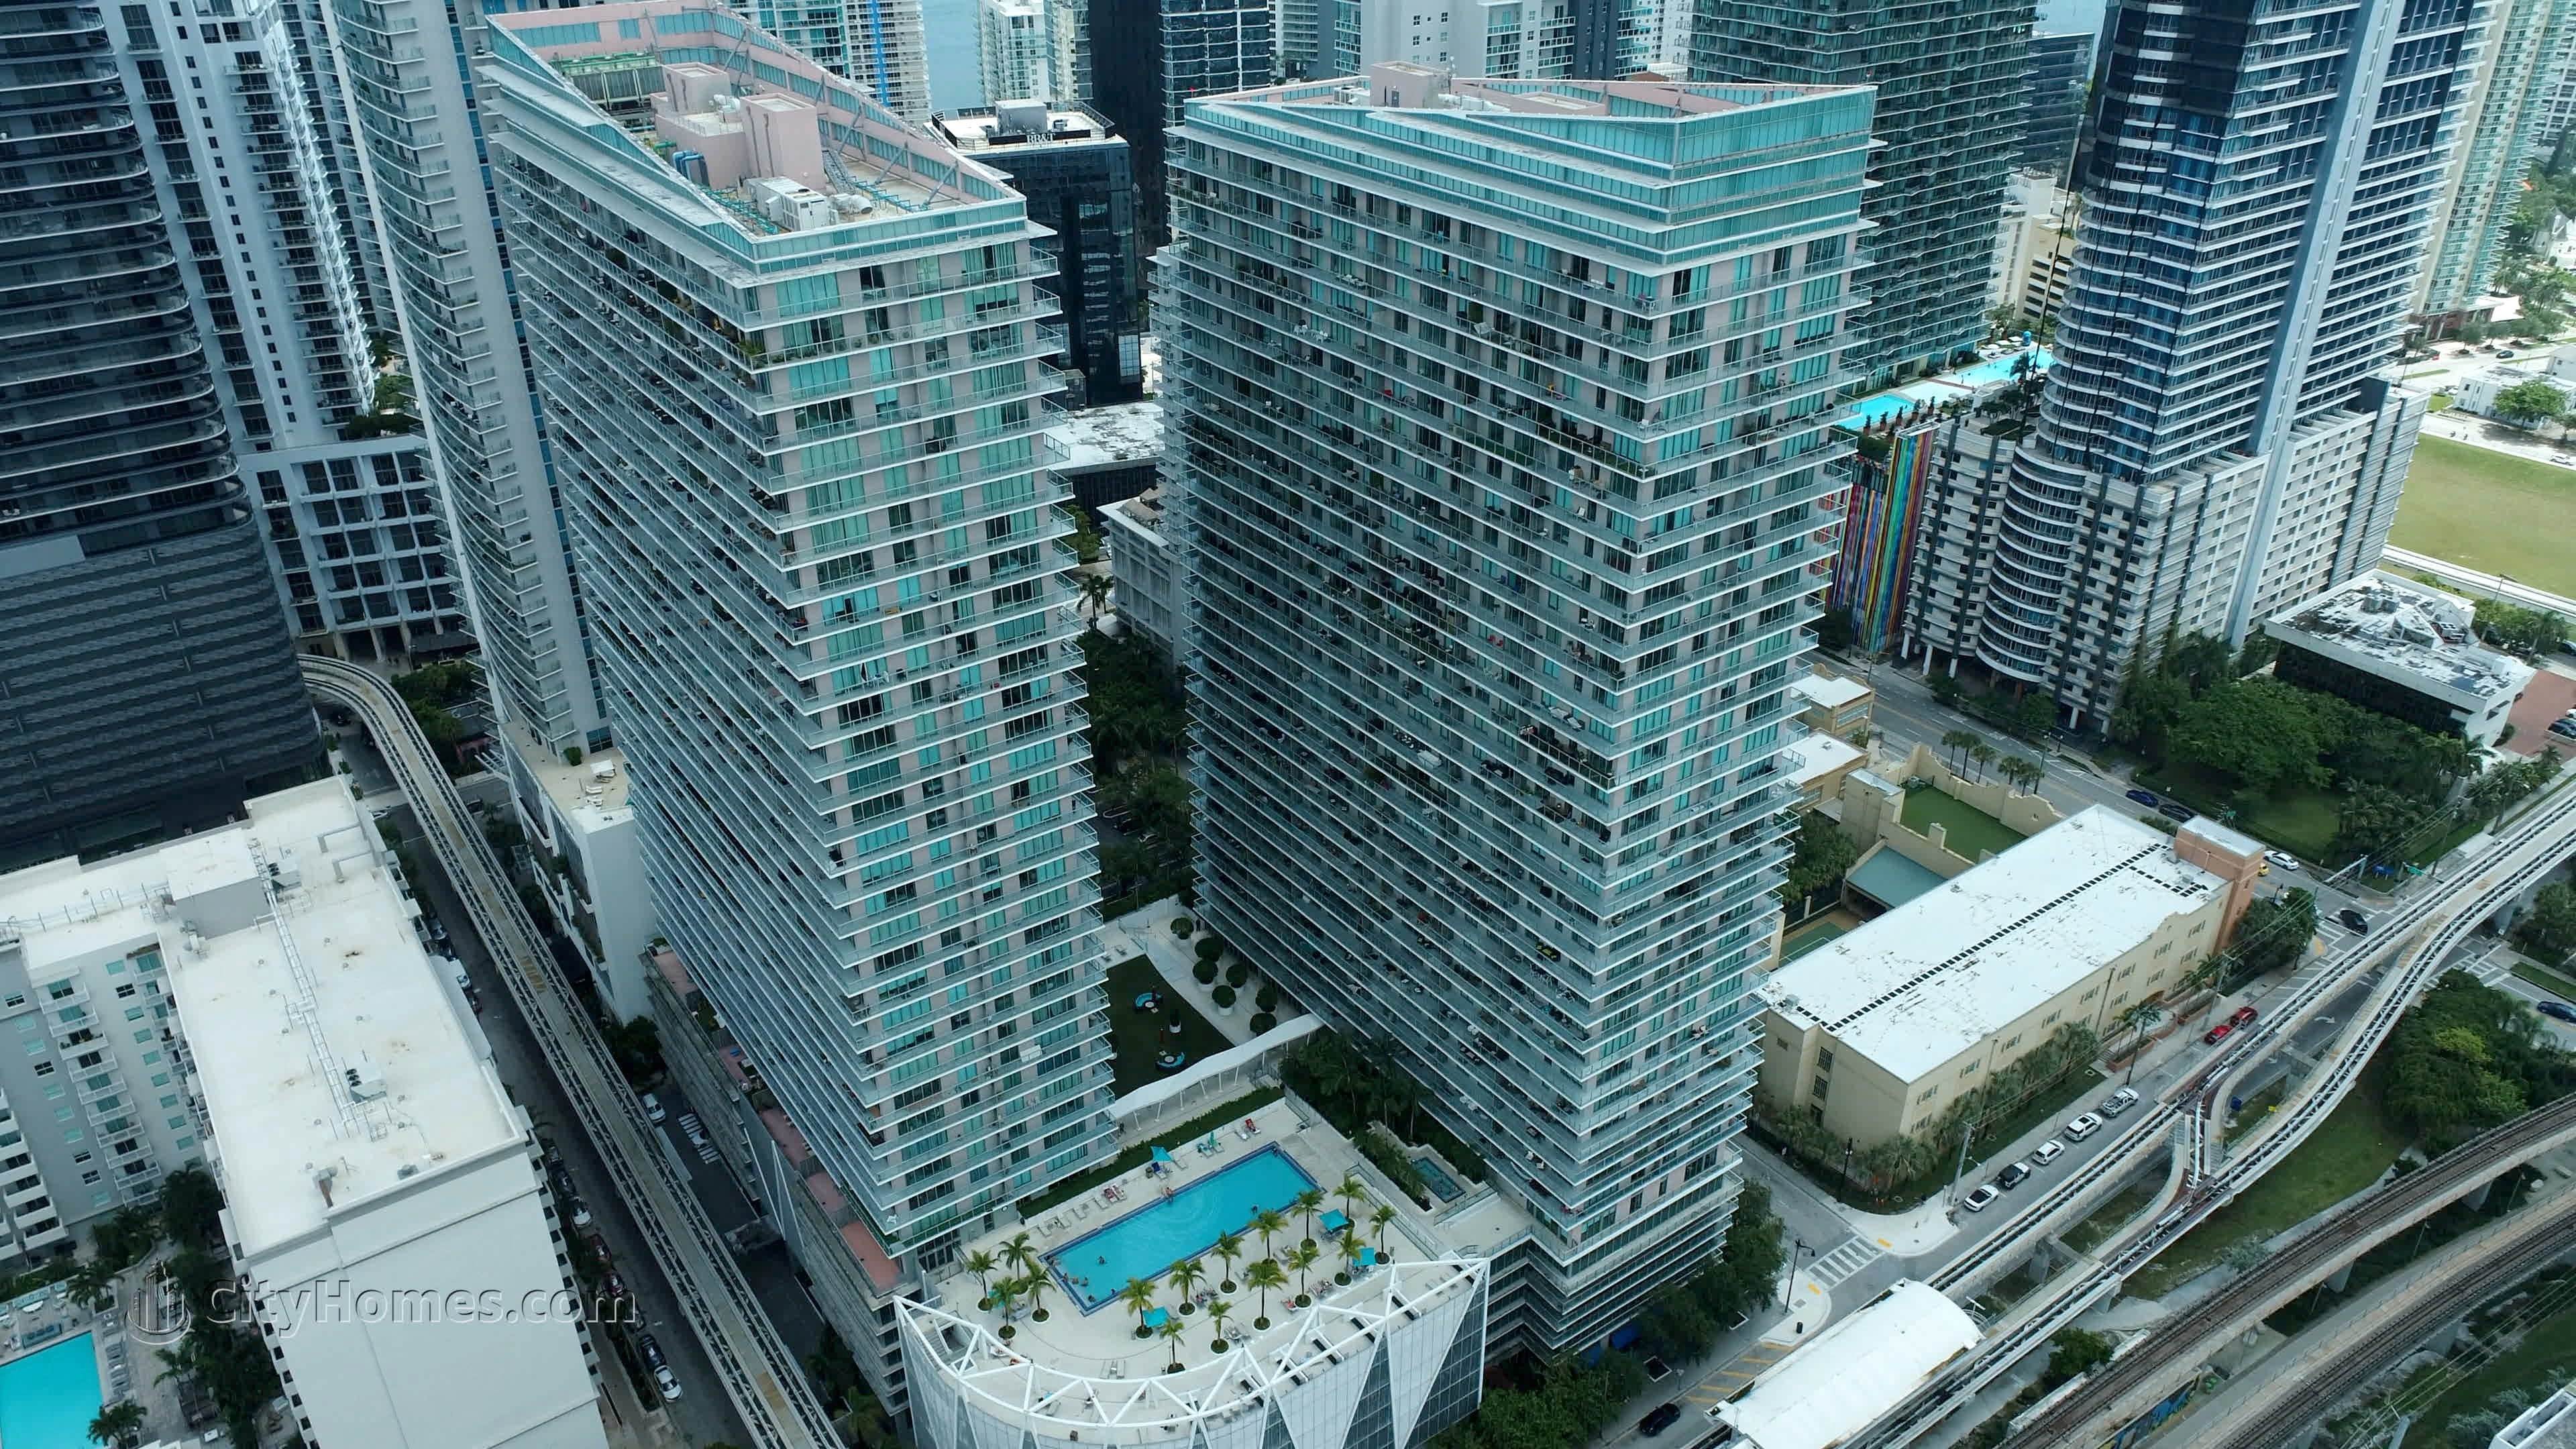 4. 79 SW 12th Street, Brickell, Miami, FL 33130에 Axis - South Tower 건물